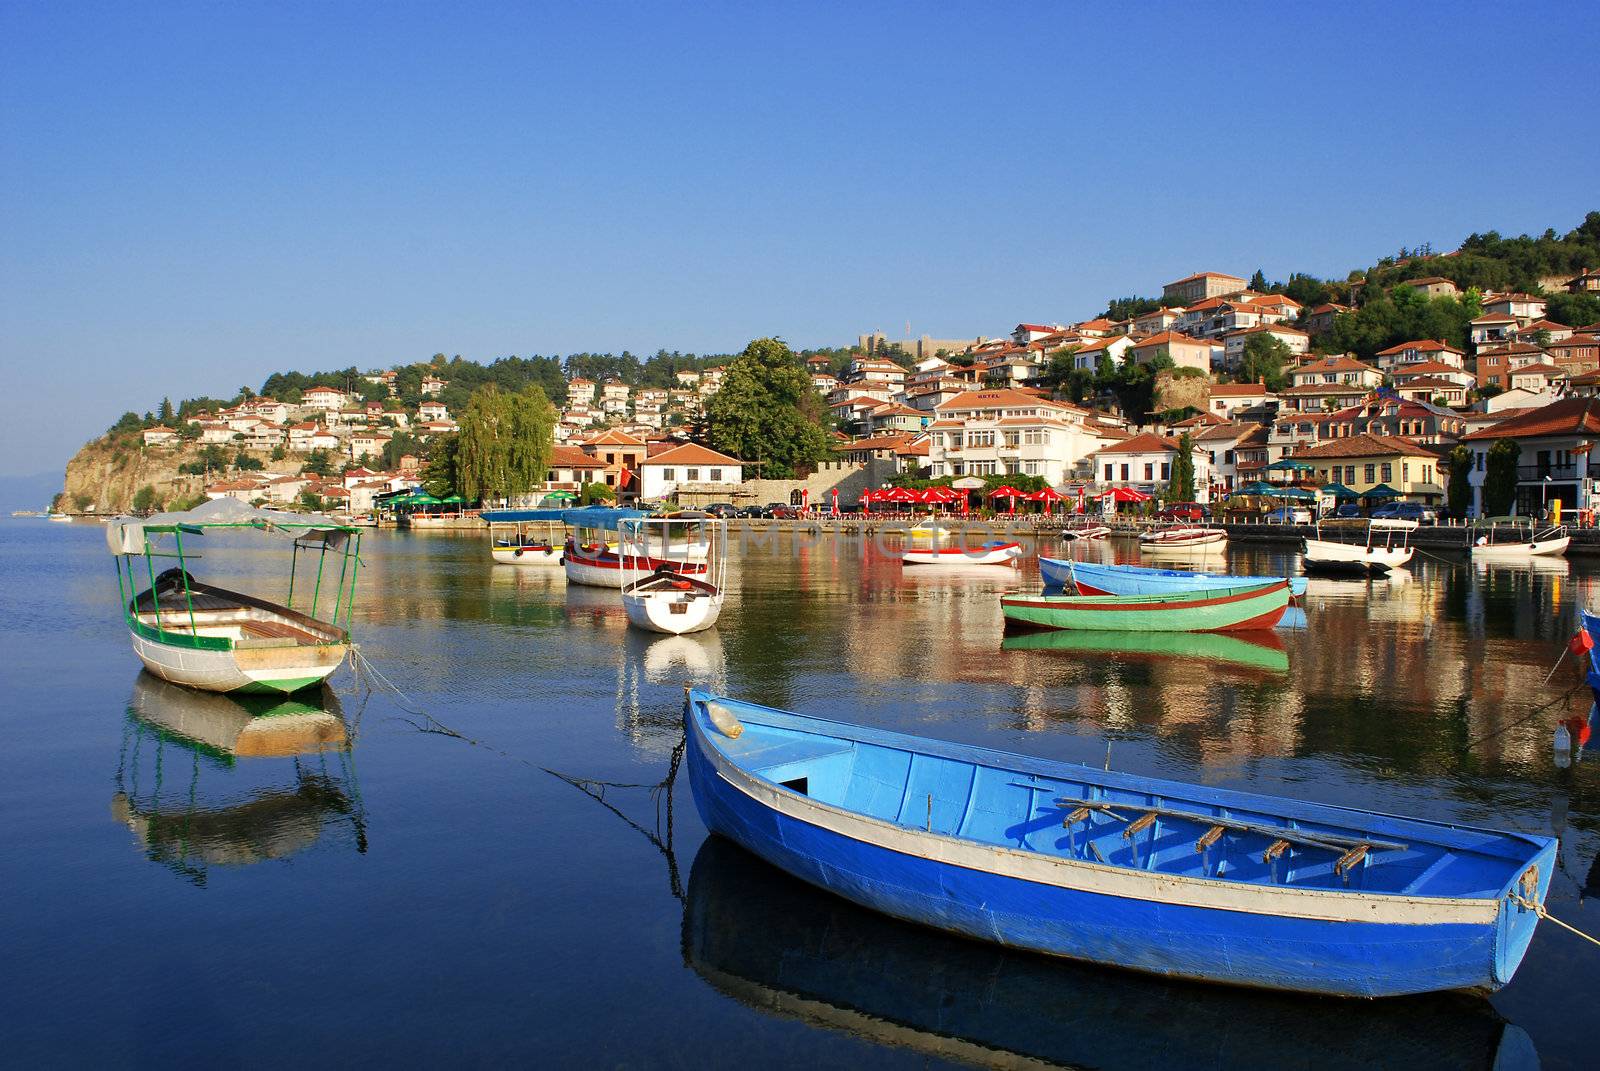 Ohrid lake. Fishing boats with the view of an old town of Ohrid in the background. by malija